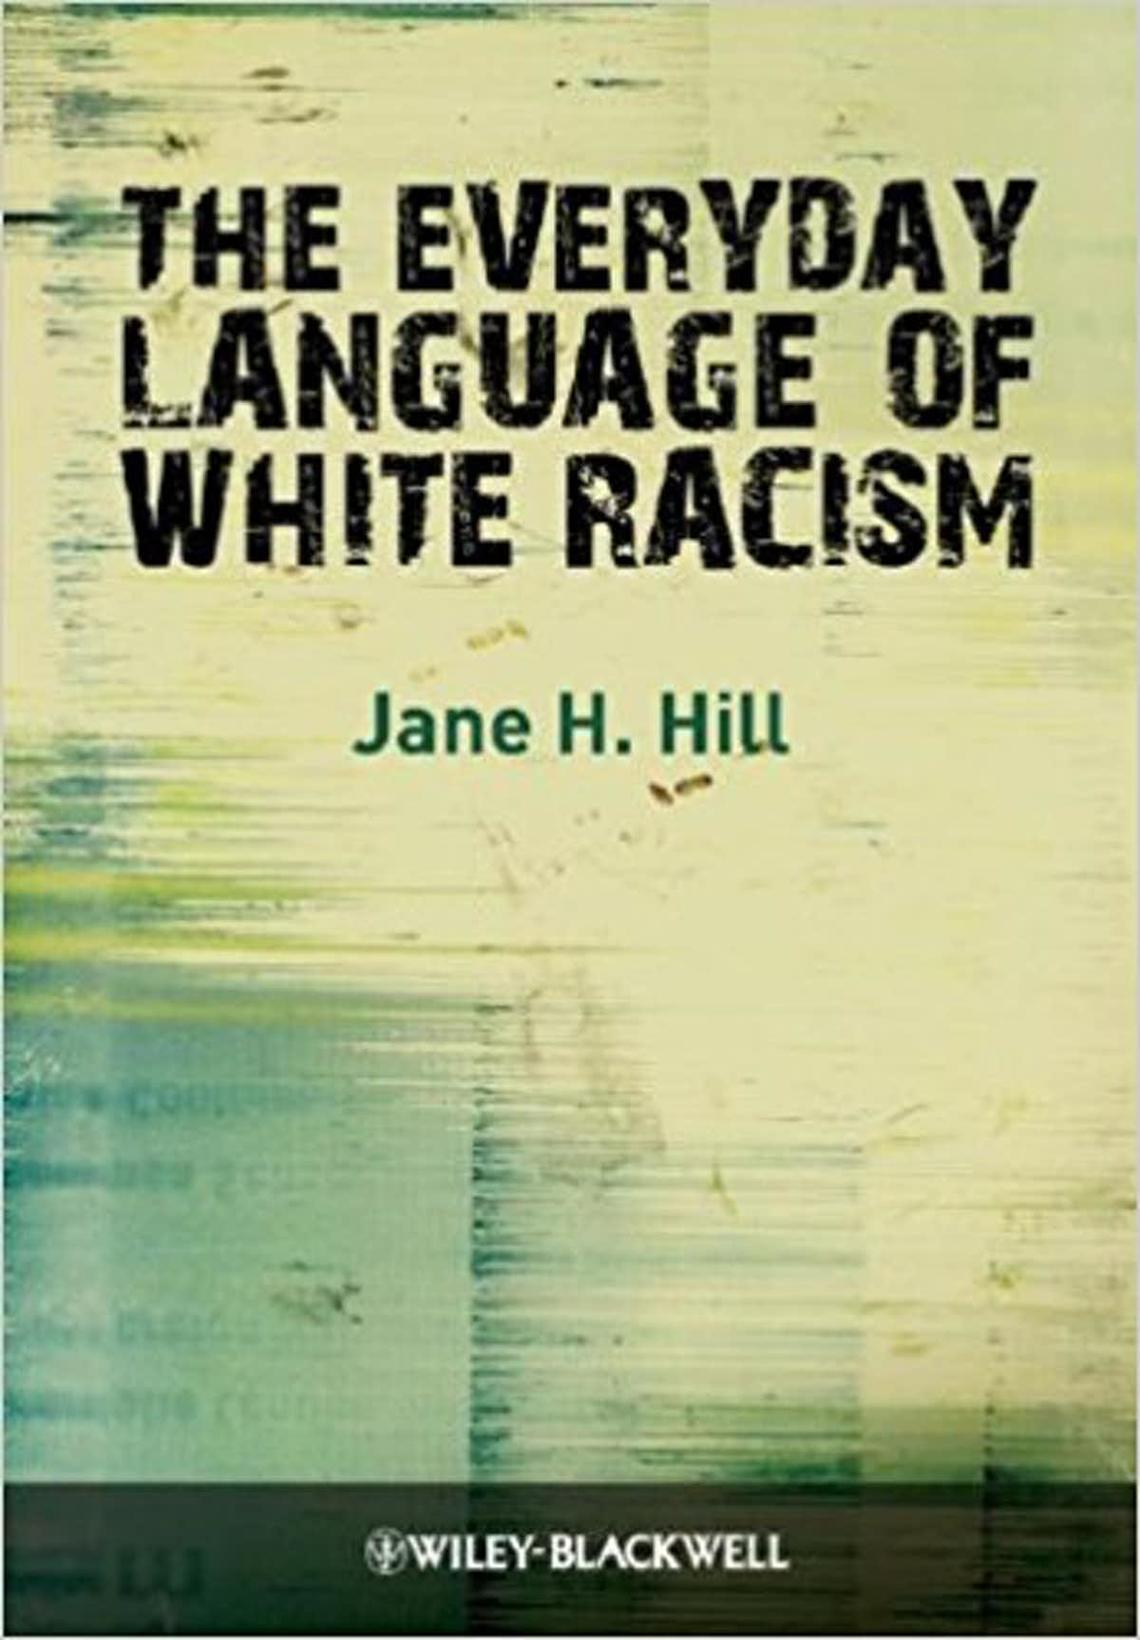 In The Everyday Language of White Racism, Jane. H. Hill explains that the use of the word squ-w in English was racist from the start.